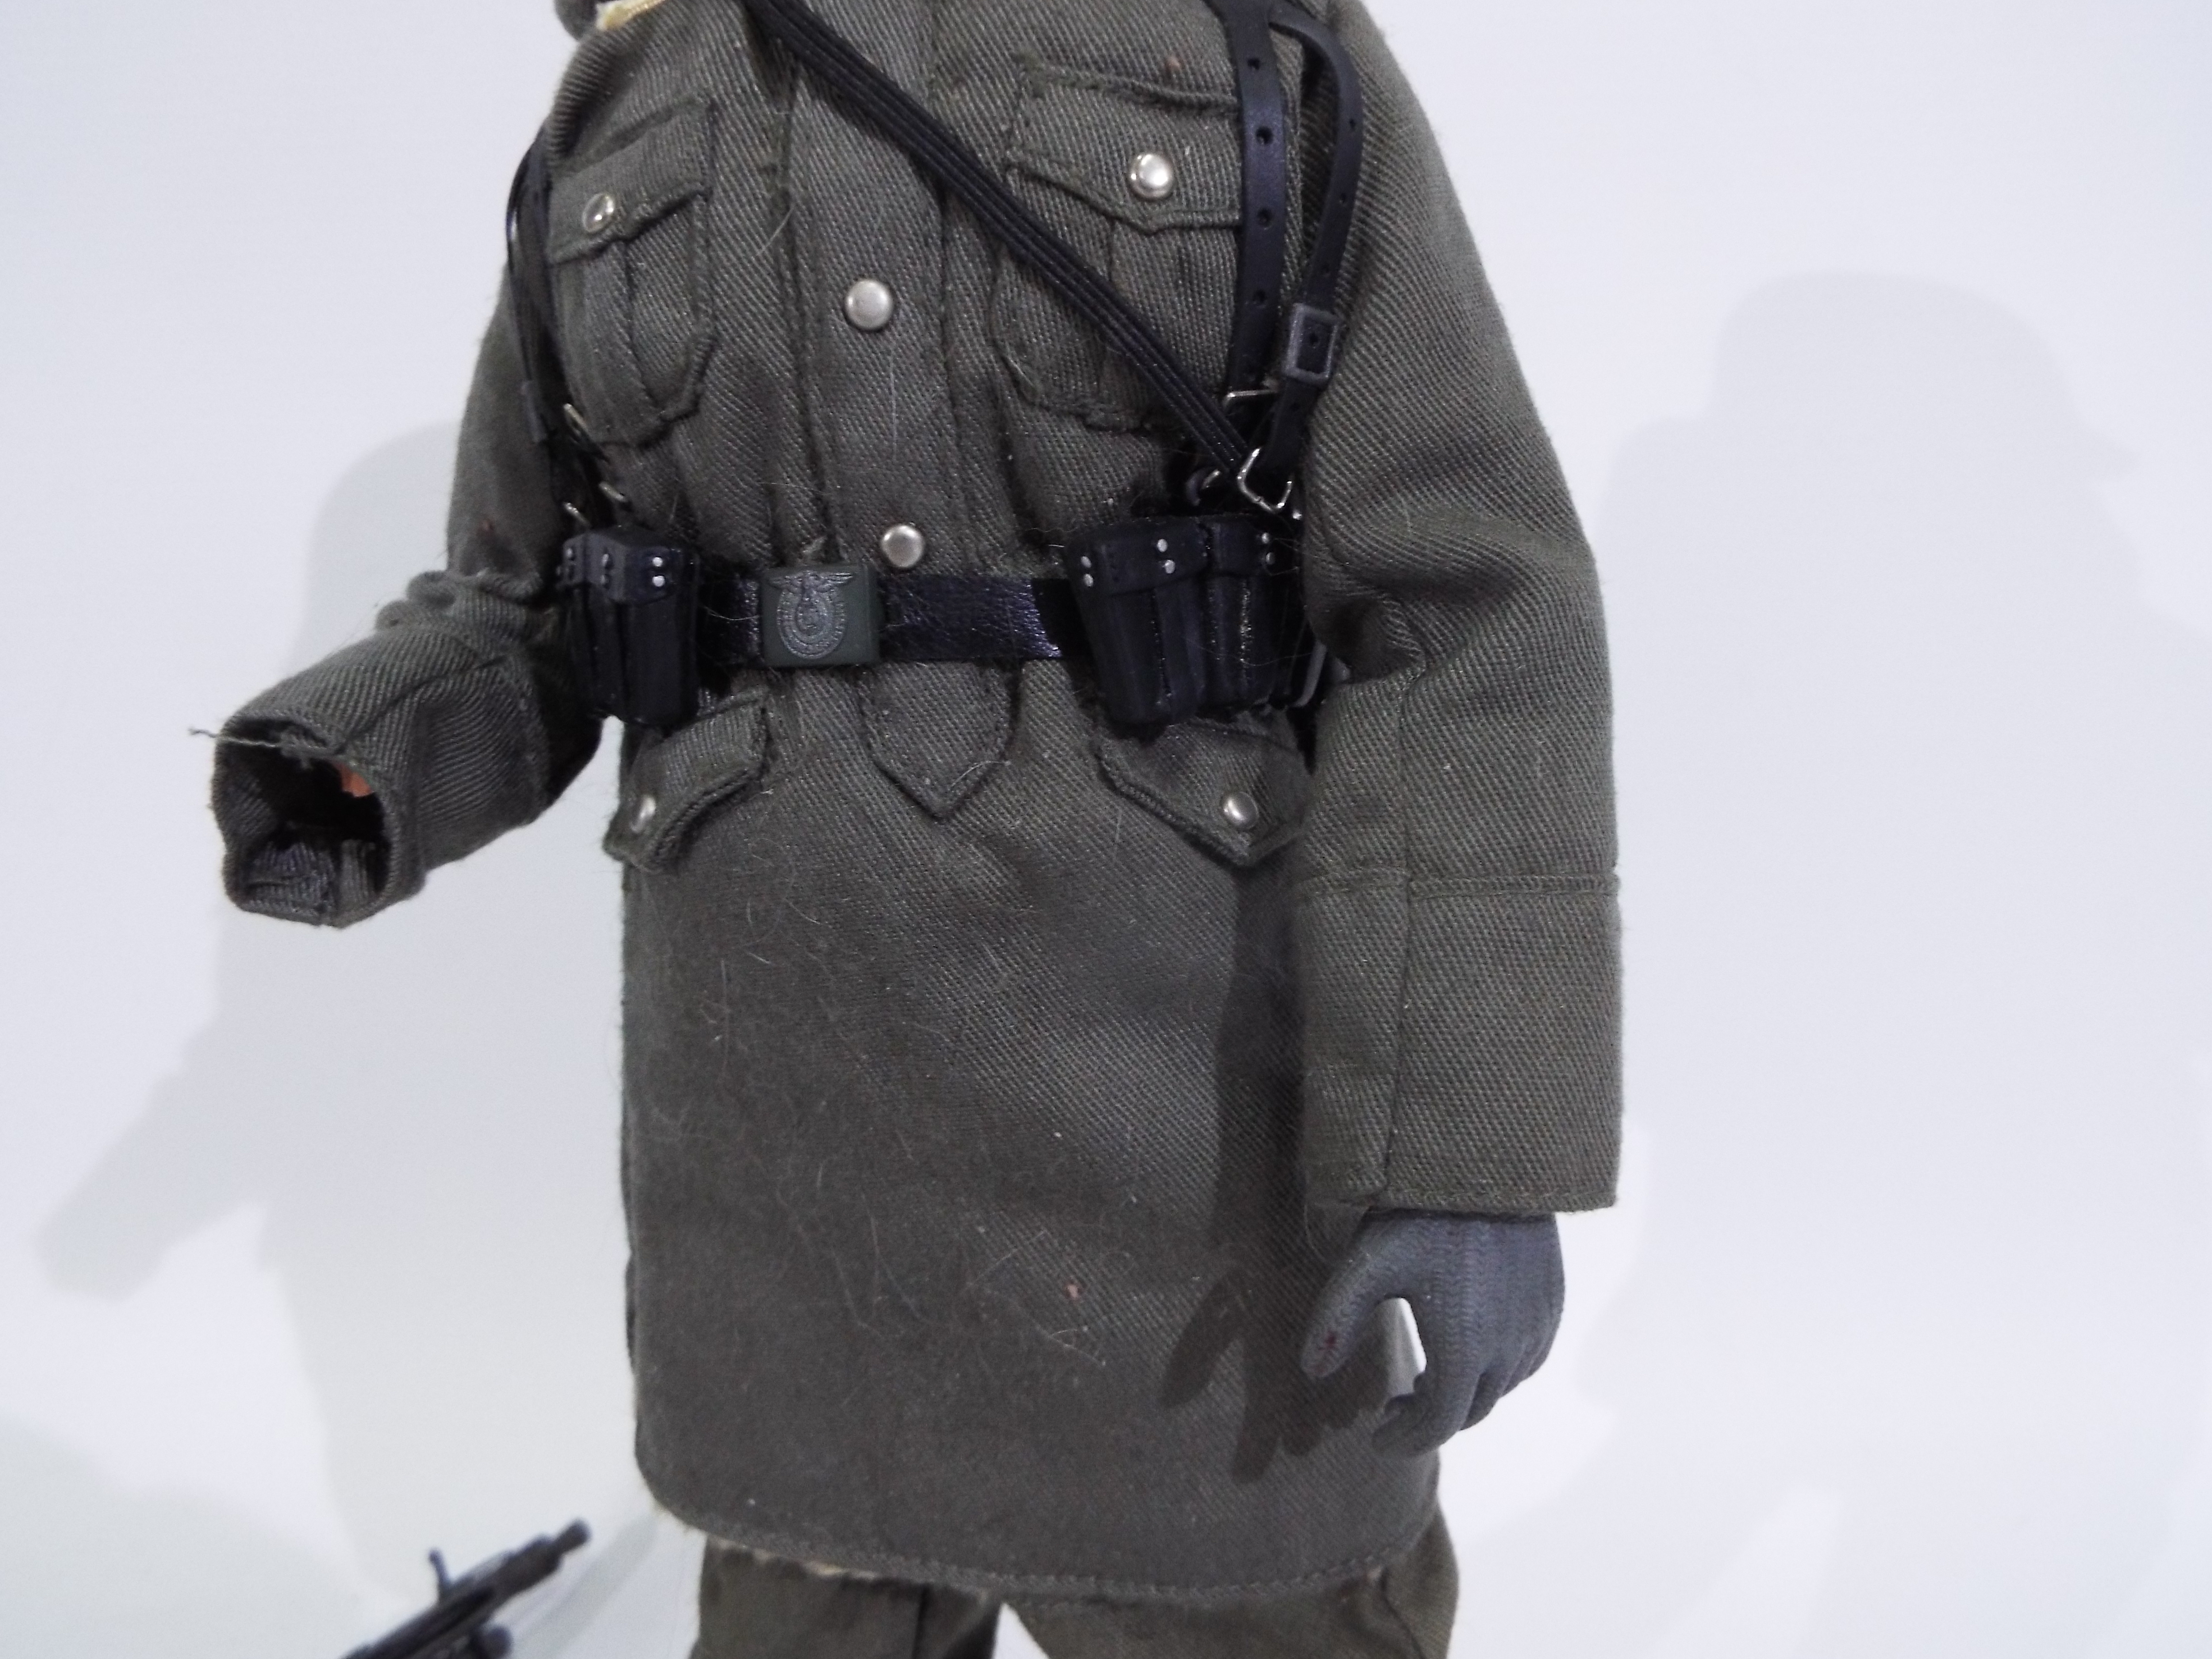 Dragon - An unboxed Dragon WWII German Forces 1:6 scale #70010 "Otto" Grenadier Machine Gunner. - Image 4 of 7